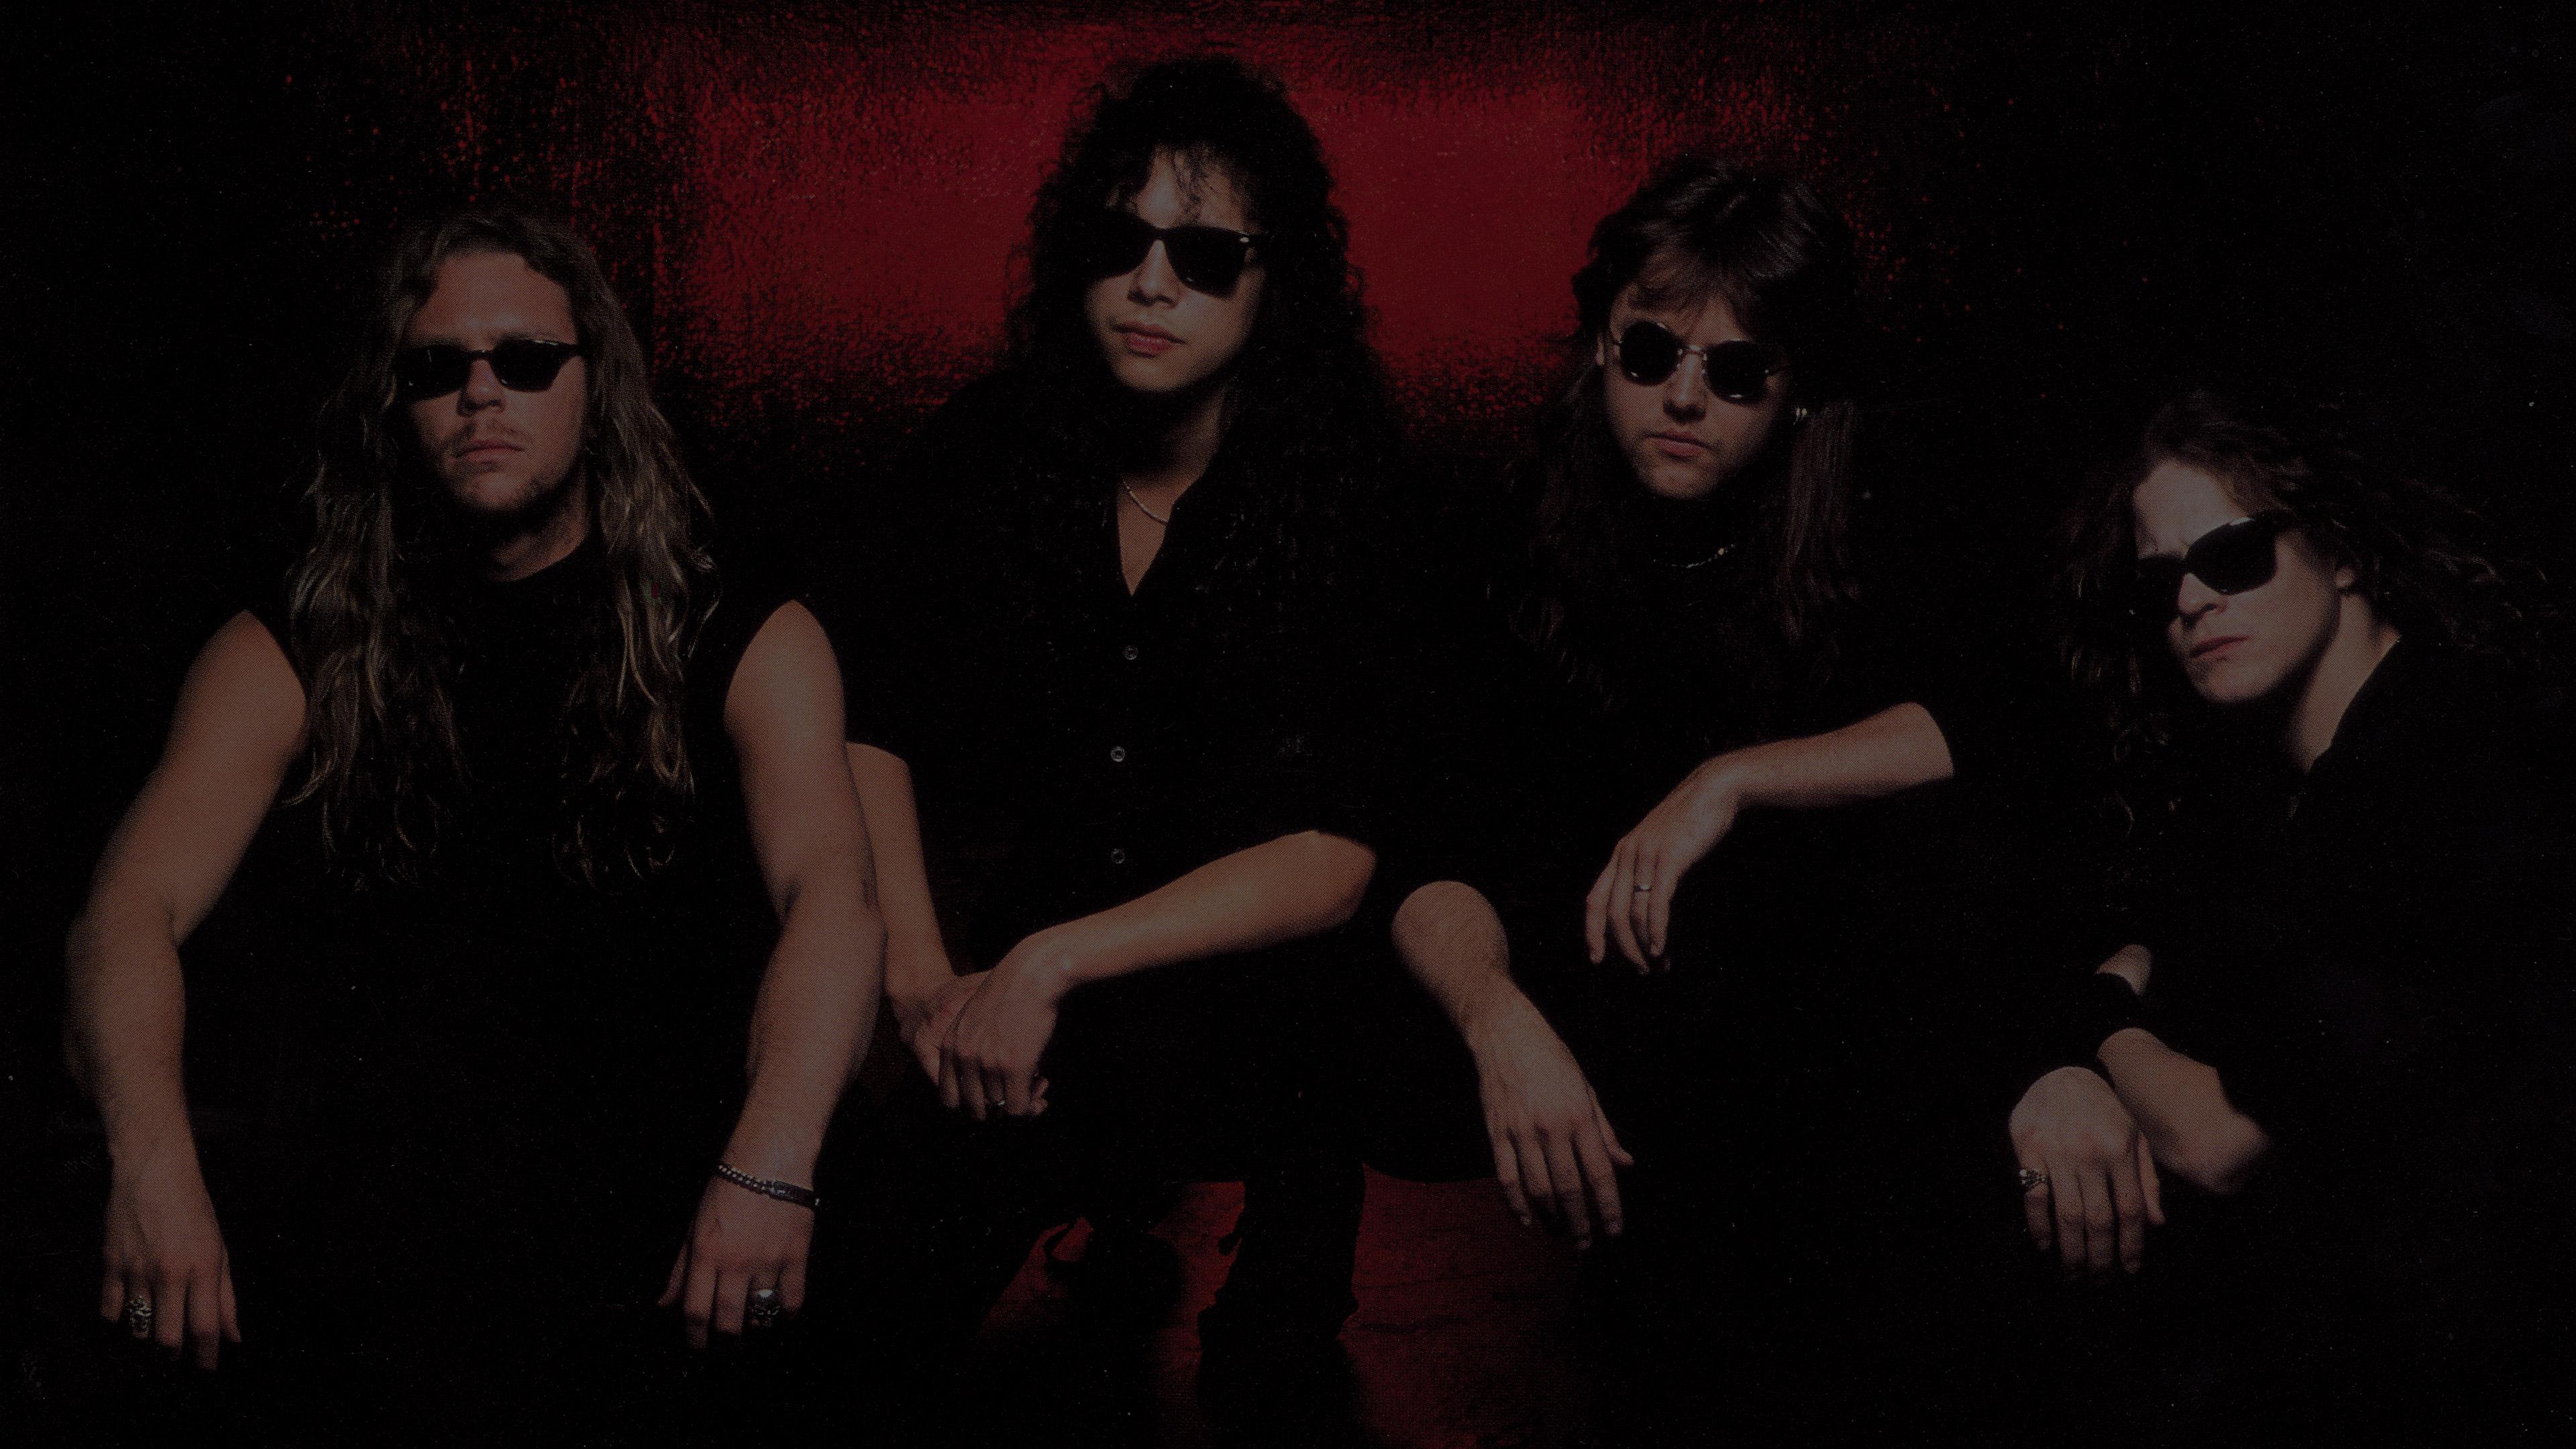 Banner Image for Metallica's Song "Dyers Eve"